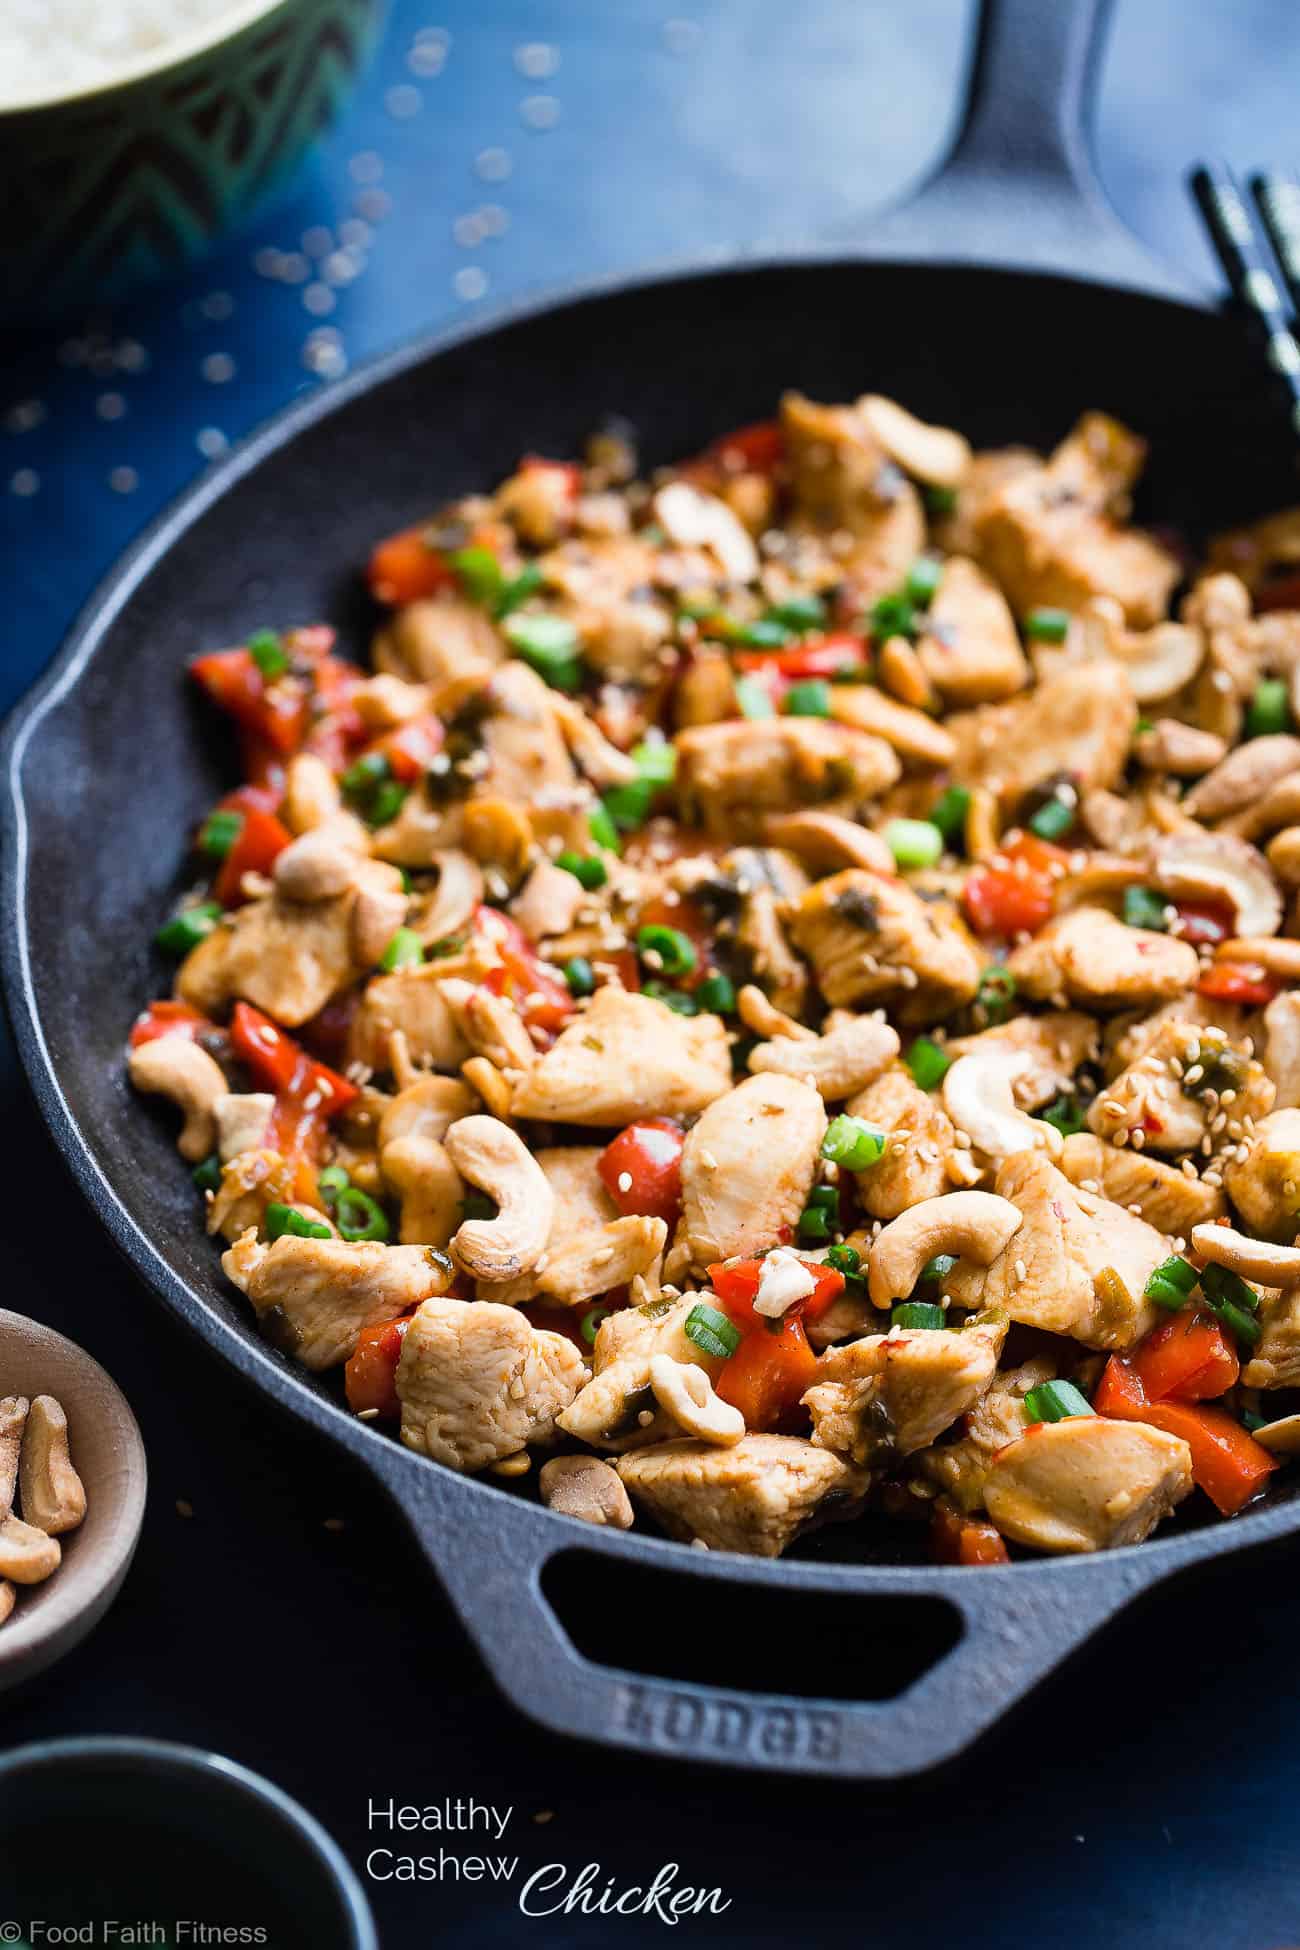 Easy Paleo Cashew Chicken Stir Fry - A healthy, gluten, grain and dairy free weeknight meal that the whole family will love! Ready in 20 minutes and WAY better than takeout! | #Foodfaithfitness | #Paleo #Glutenfree #Healthy #StirFry #Dairyfree